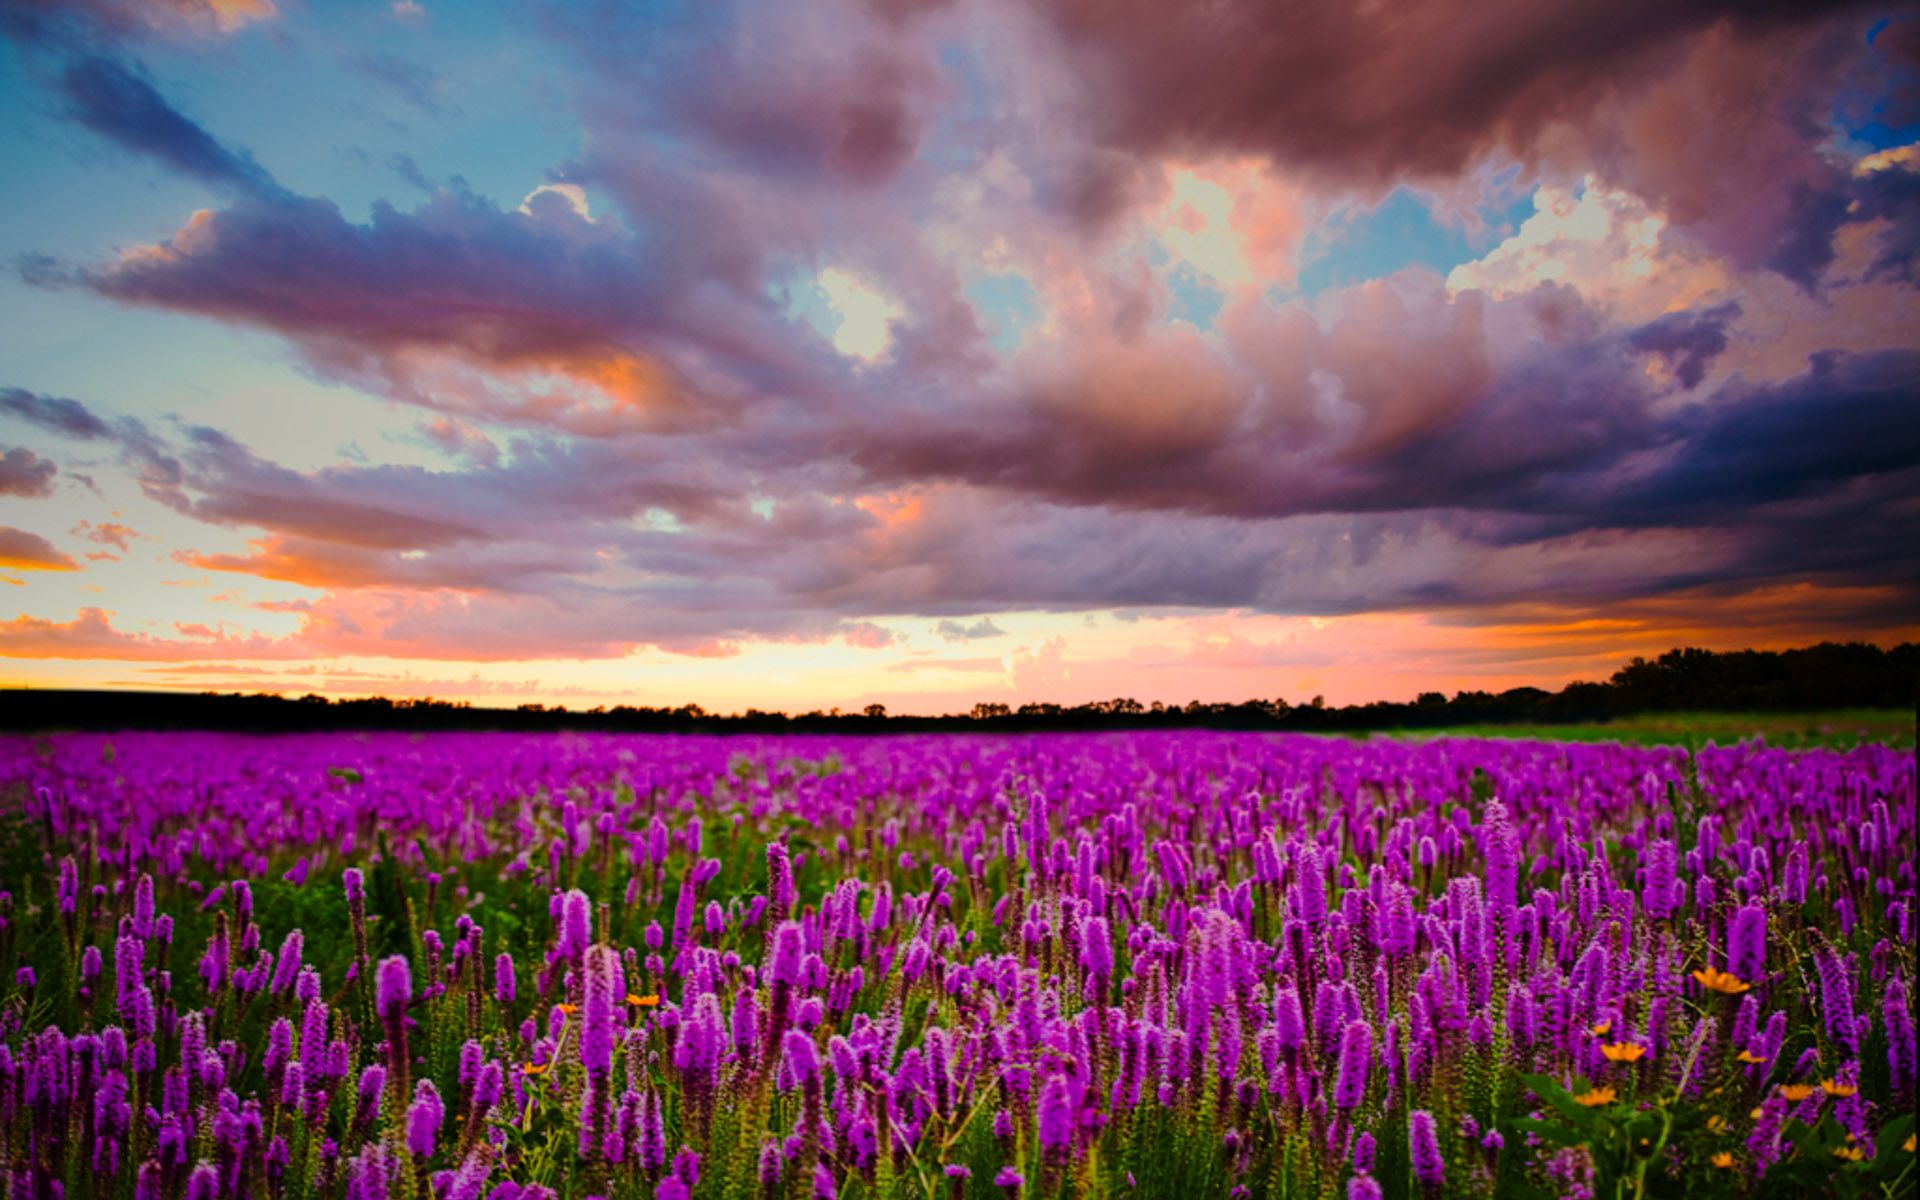 Sunset Field With Purple Flowers Of Lavender Sky With Dark Clouds Summer Wallpaper HD 1920x1200, Wallpaper13.com